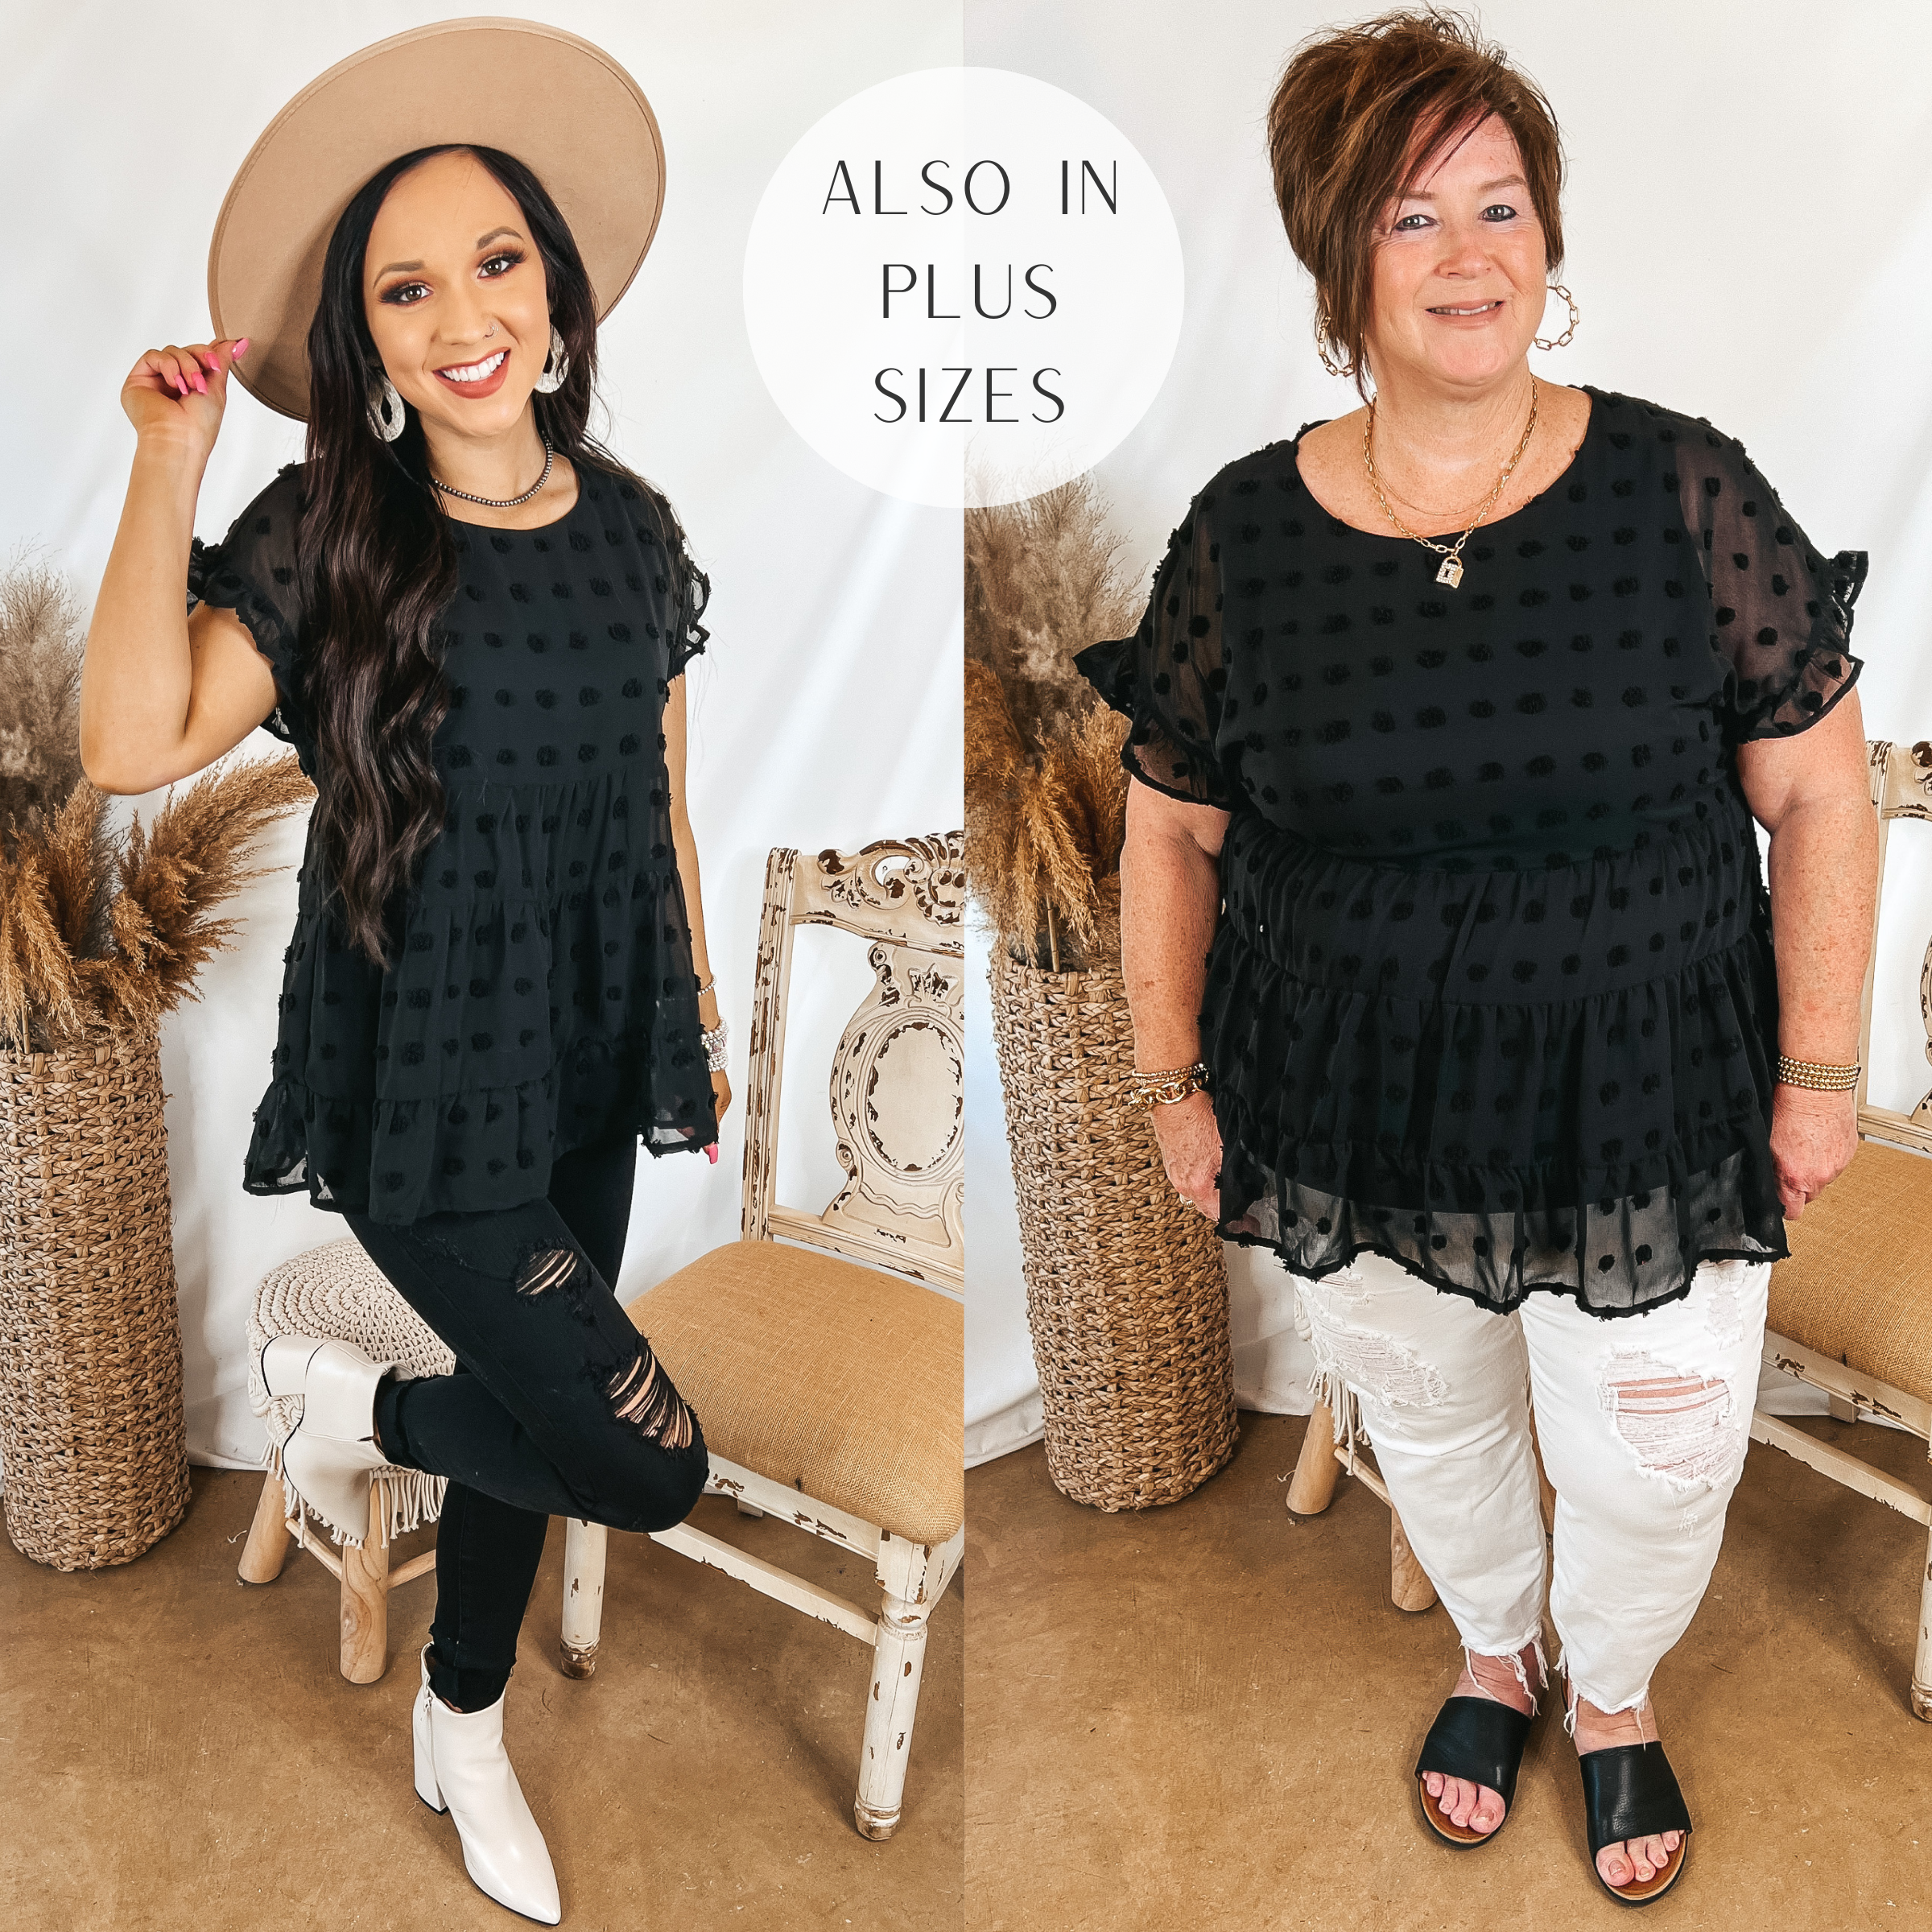 Models are wearing a black swiss dot babydoll top. Size small model has it paired with black boyfriend jeans, white booties, and a tan hat. Plus size model has it paired with white skinny jeans, black sandals, and gold jewelry.